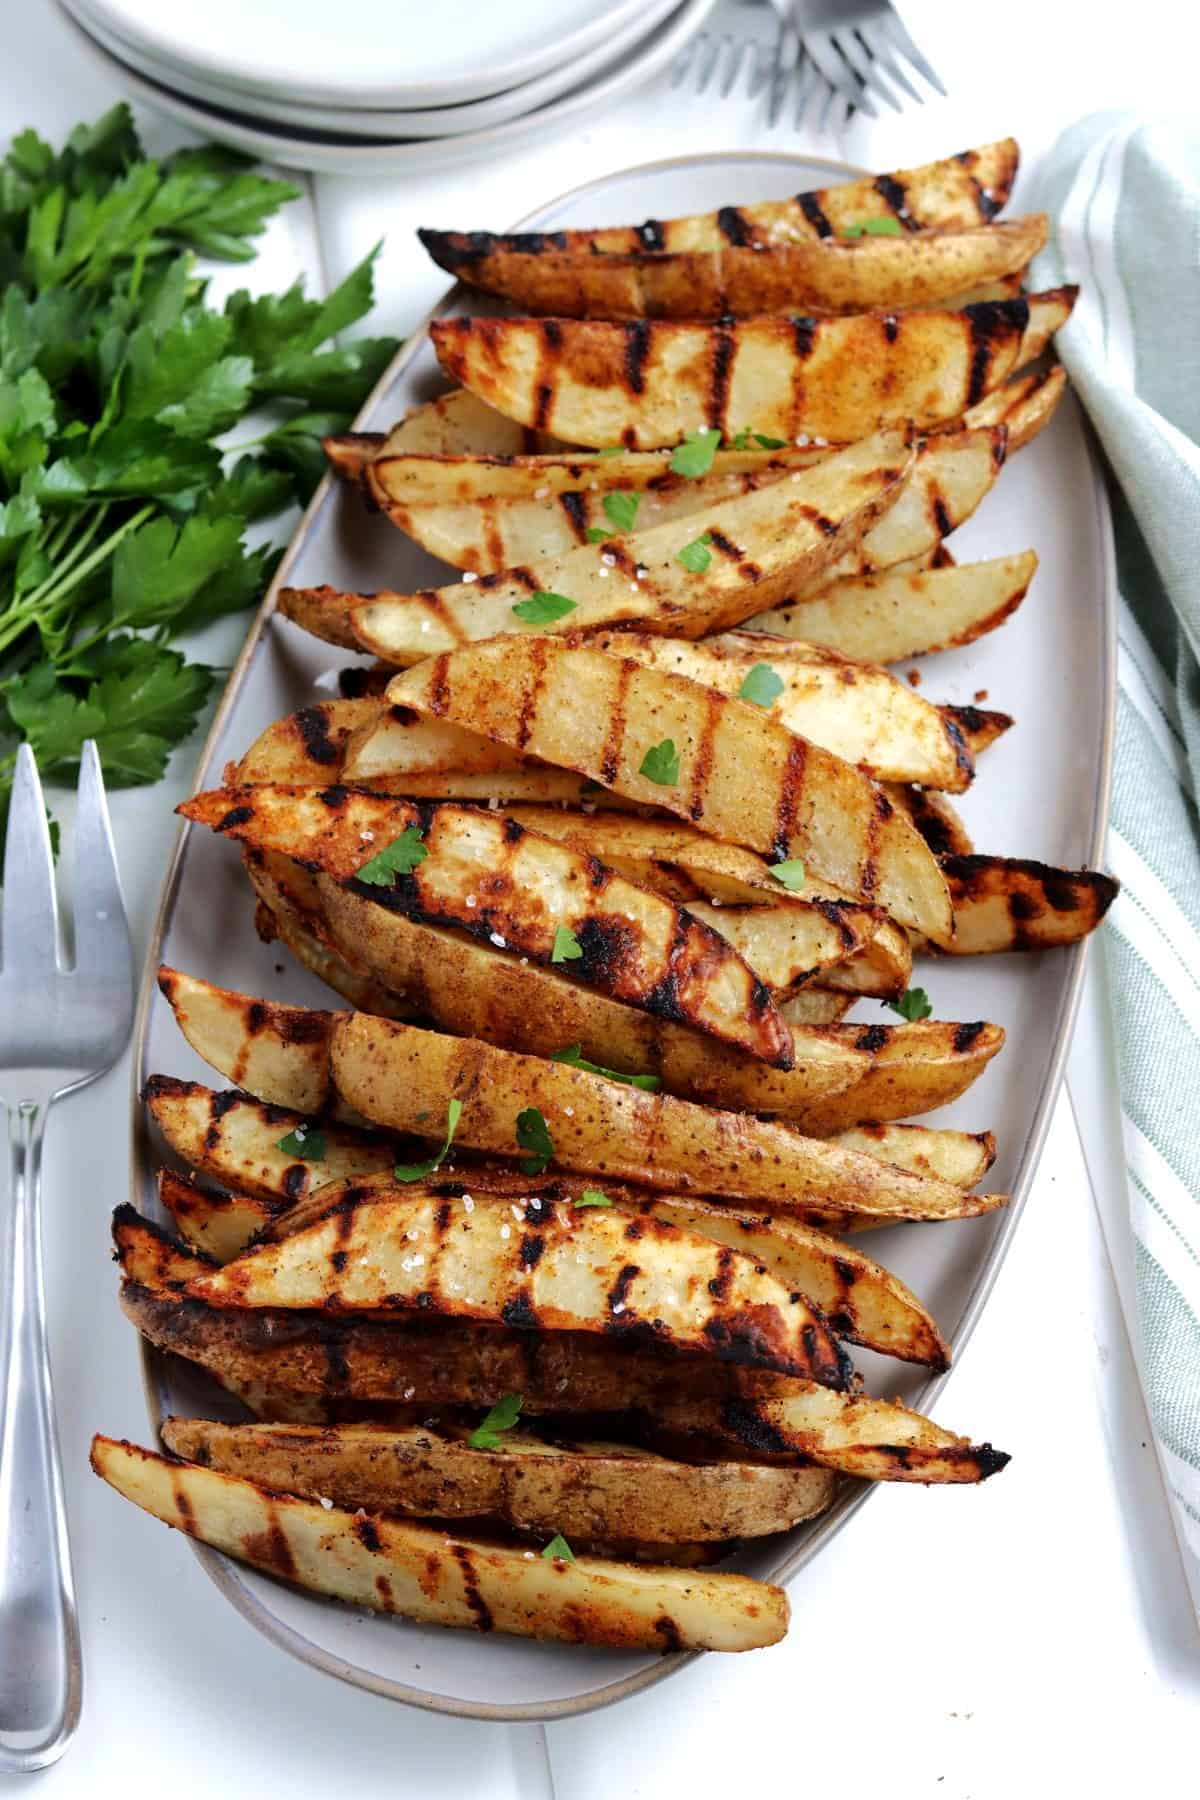 Angled pile of grilled potato wedges on an oval platter.